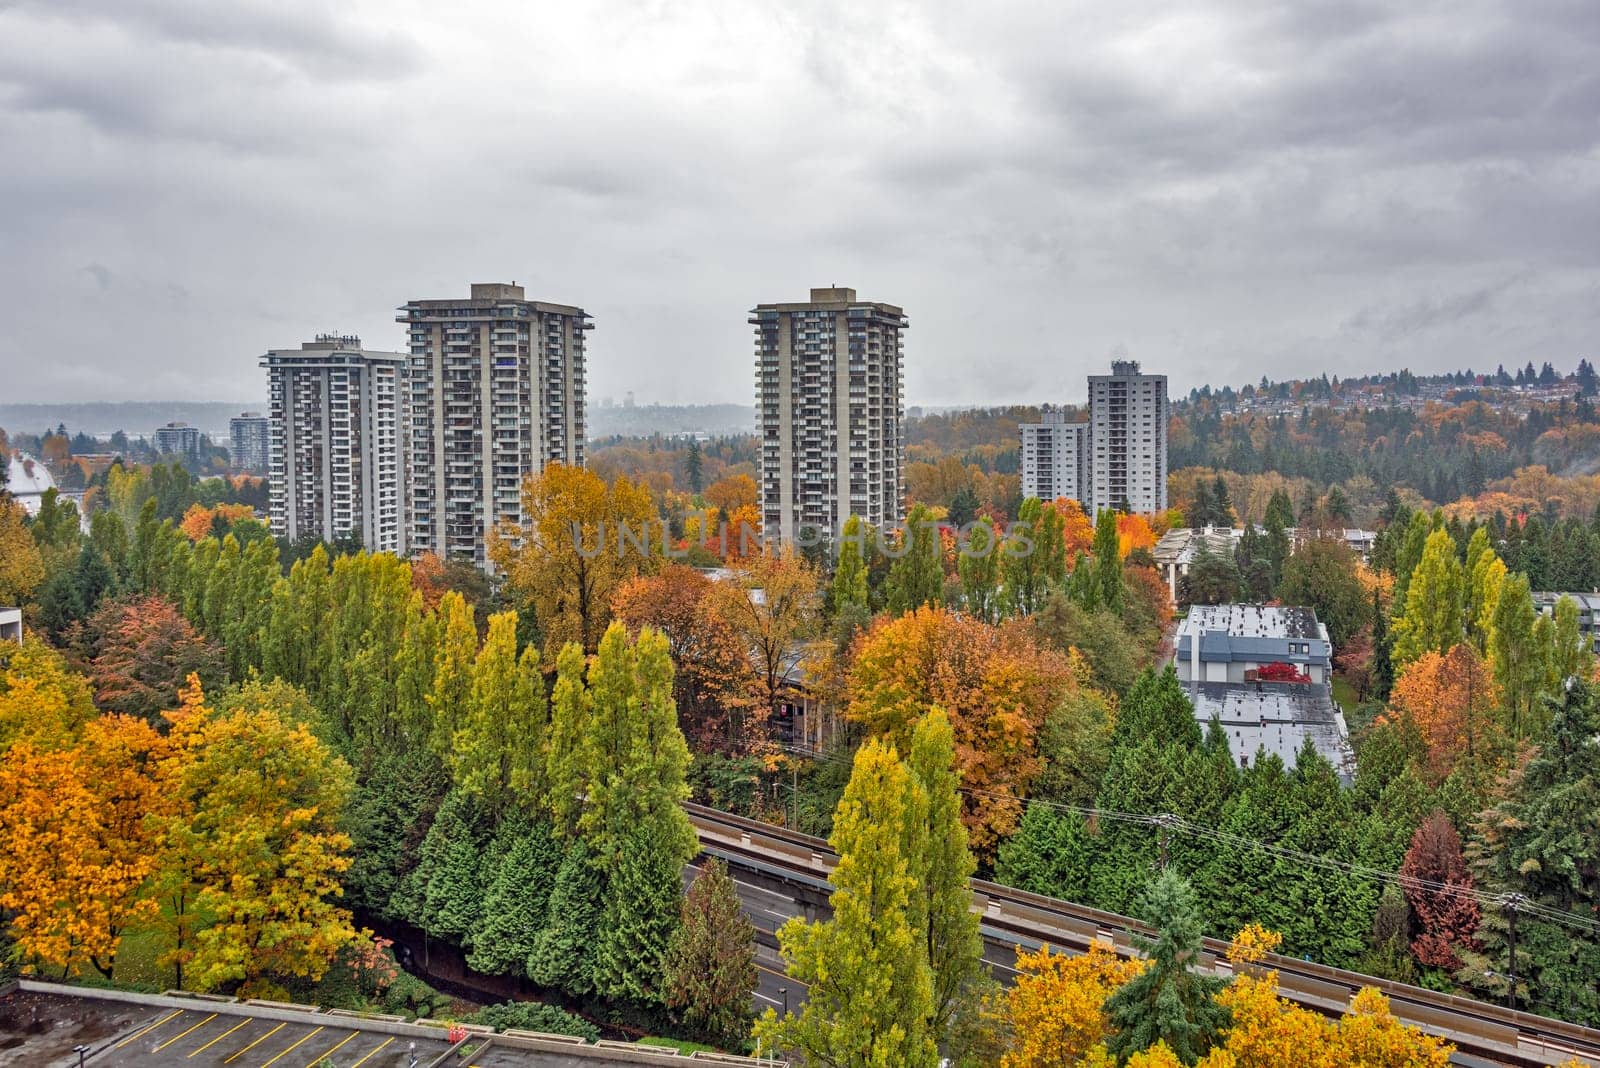 Colorful cityscape on autum season in Burnaby, BC, Canada by Imagenet